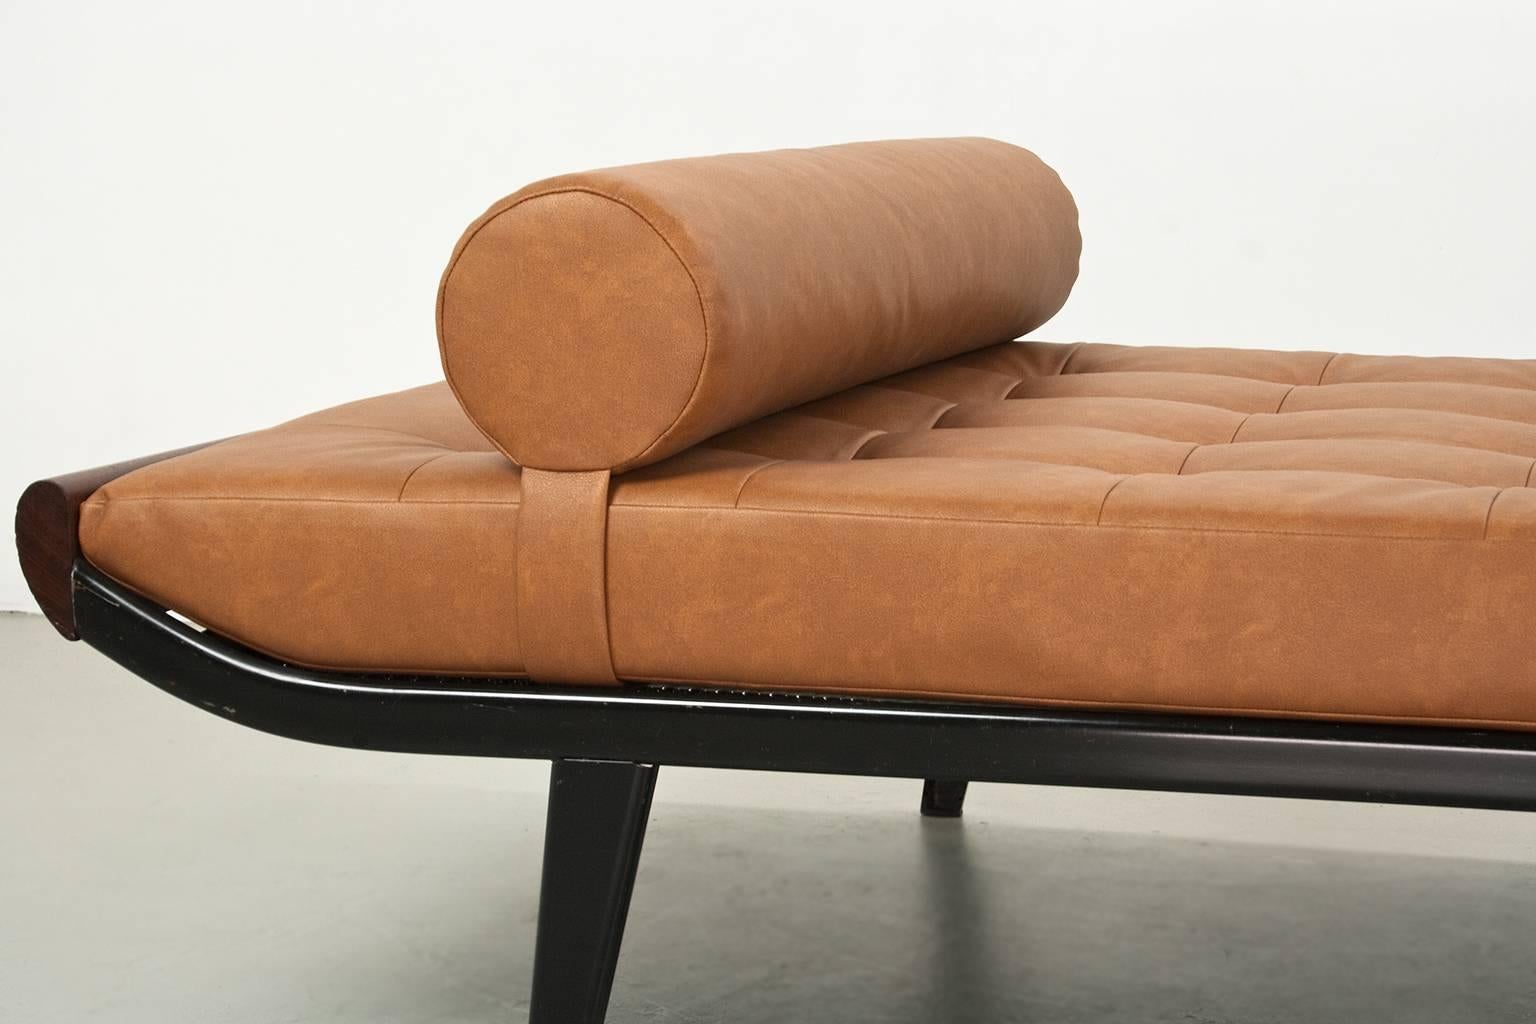 Powder-Coated Daybed Cleopatra Dutch Mid-Century Modern by Andre Cordemeyer 1953 for Auping